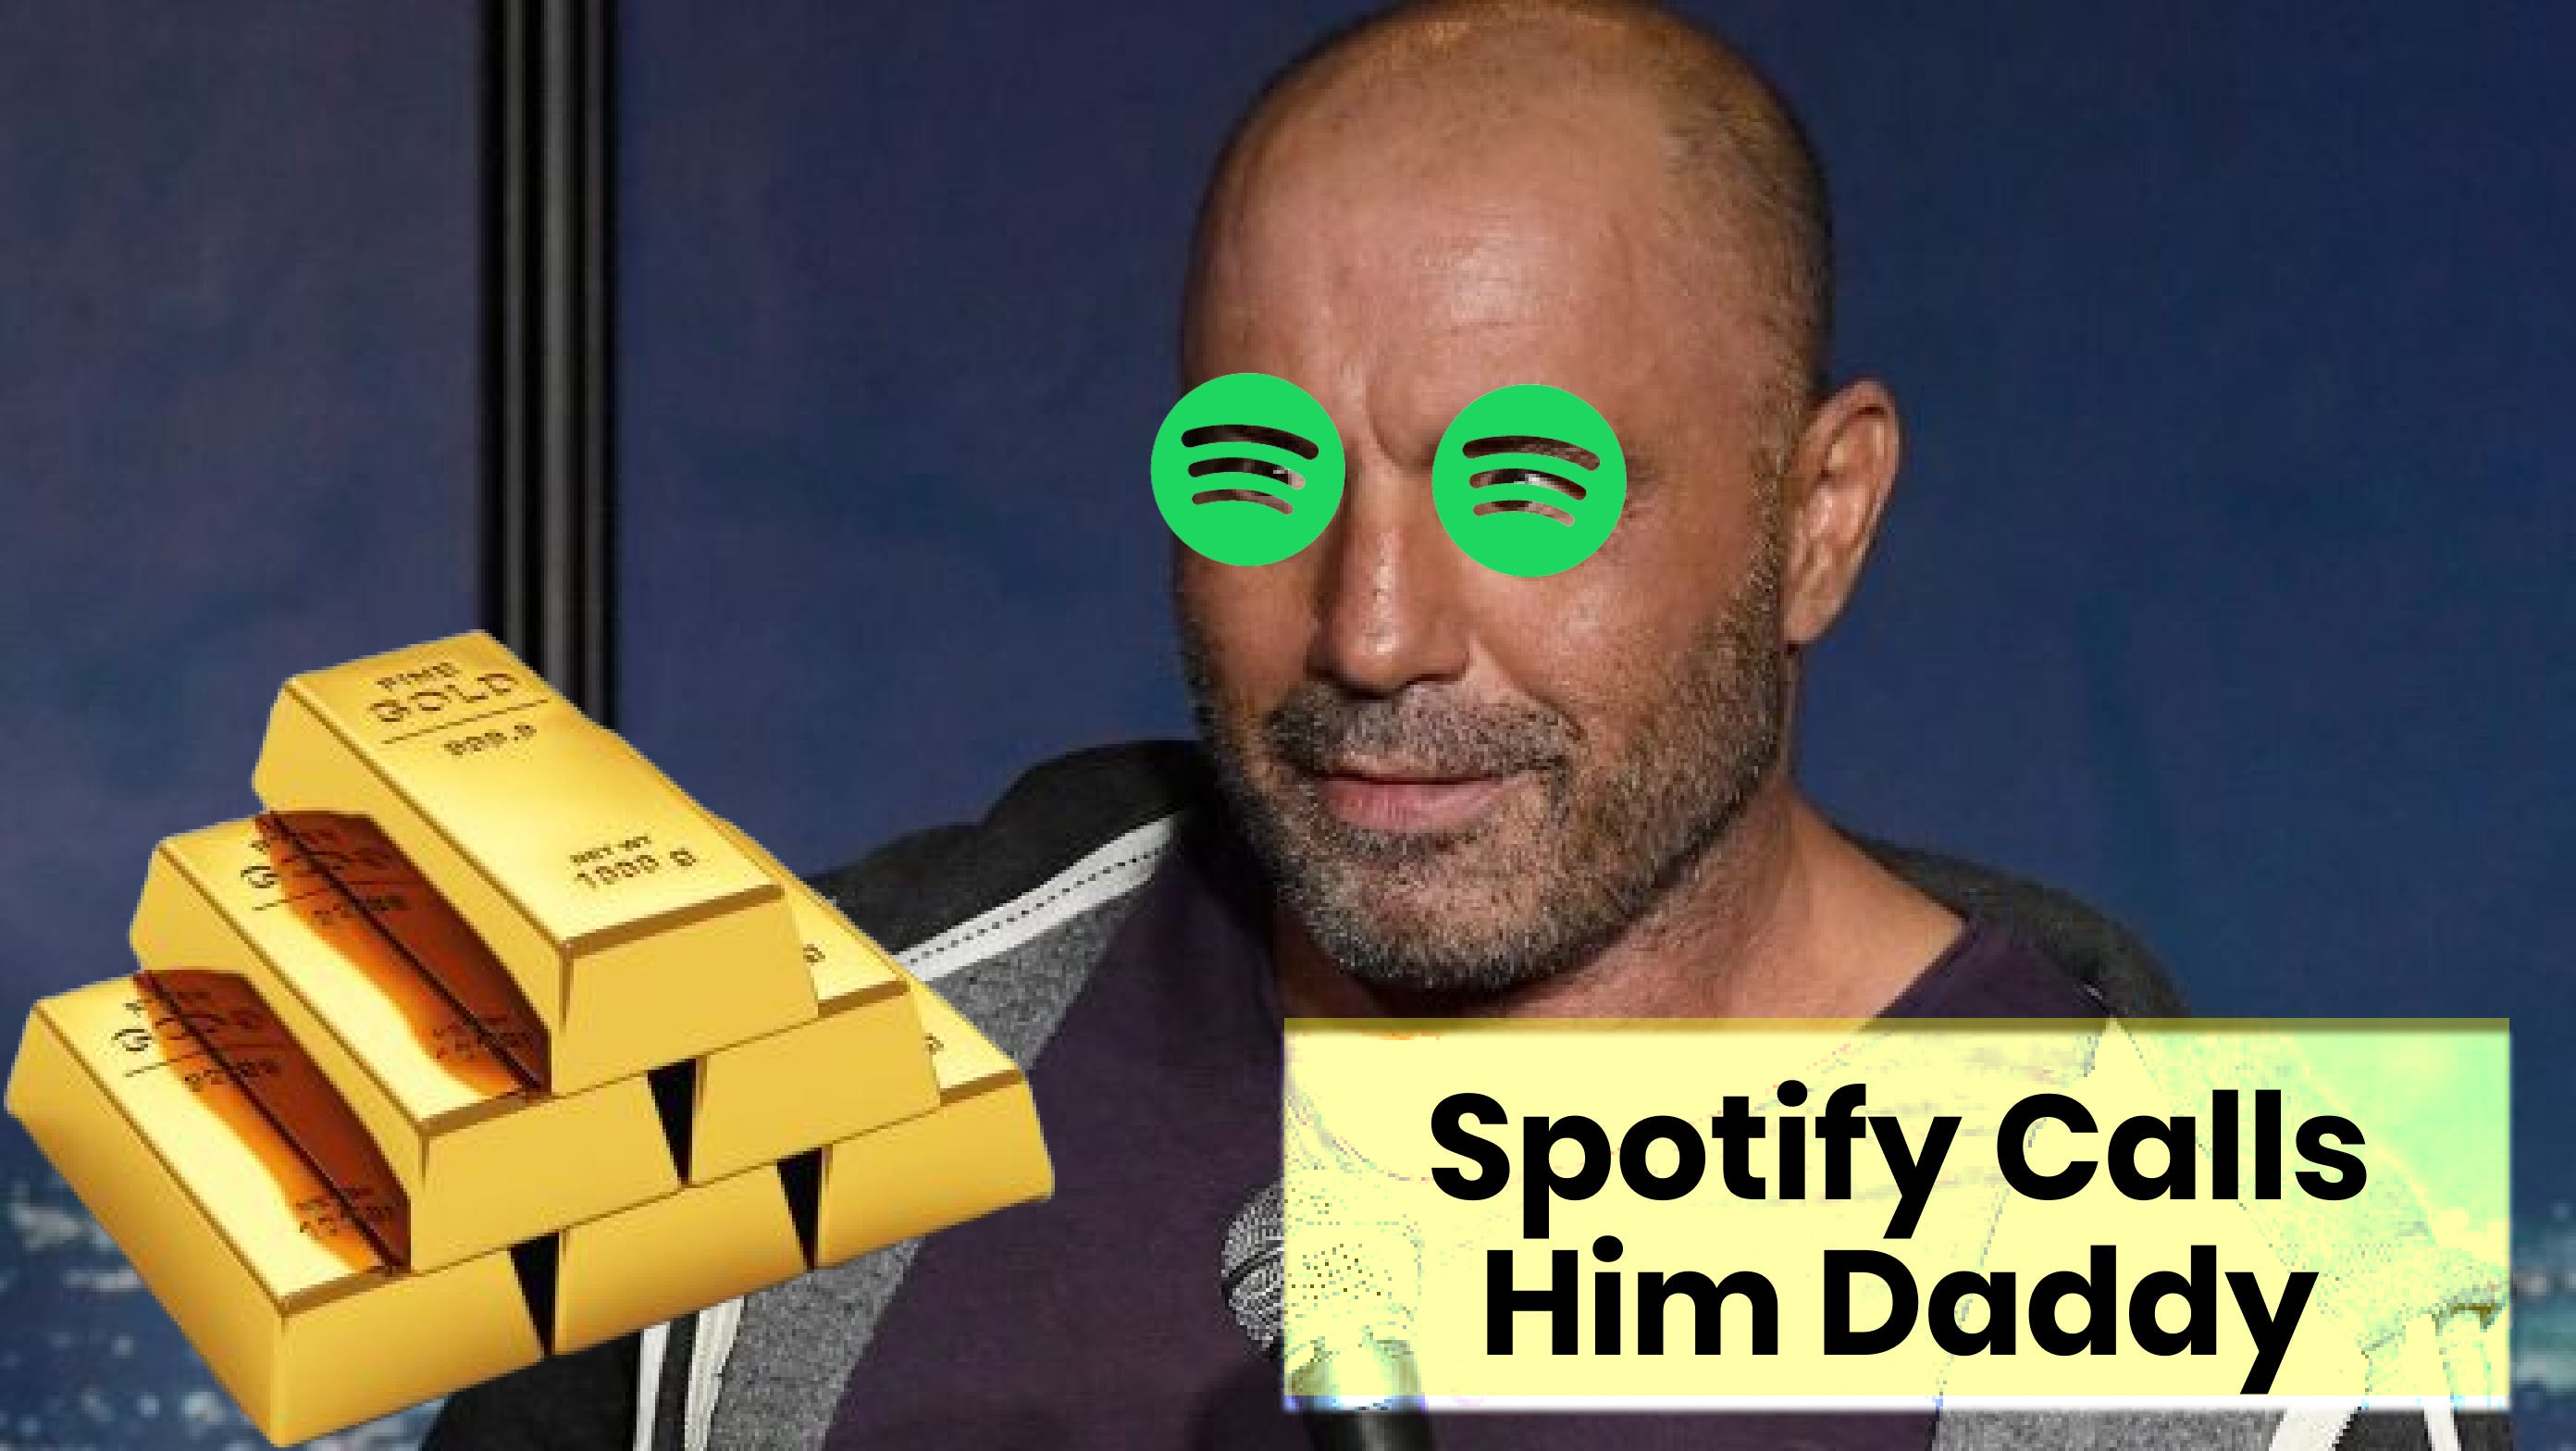 Daniel Ek says he's probably the least powerful person at Spotify